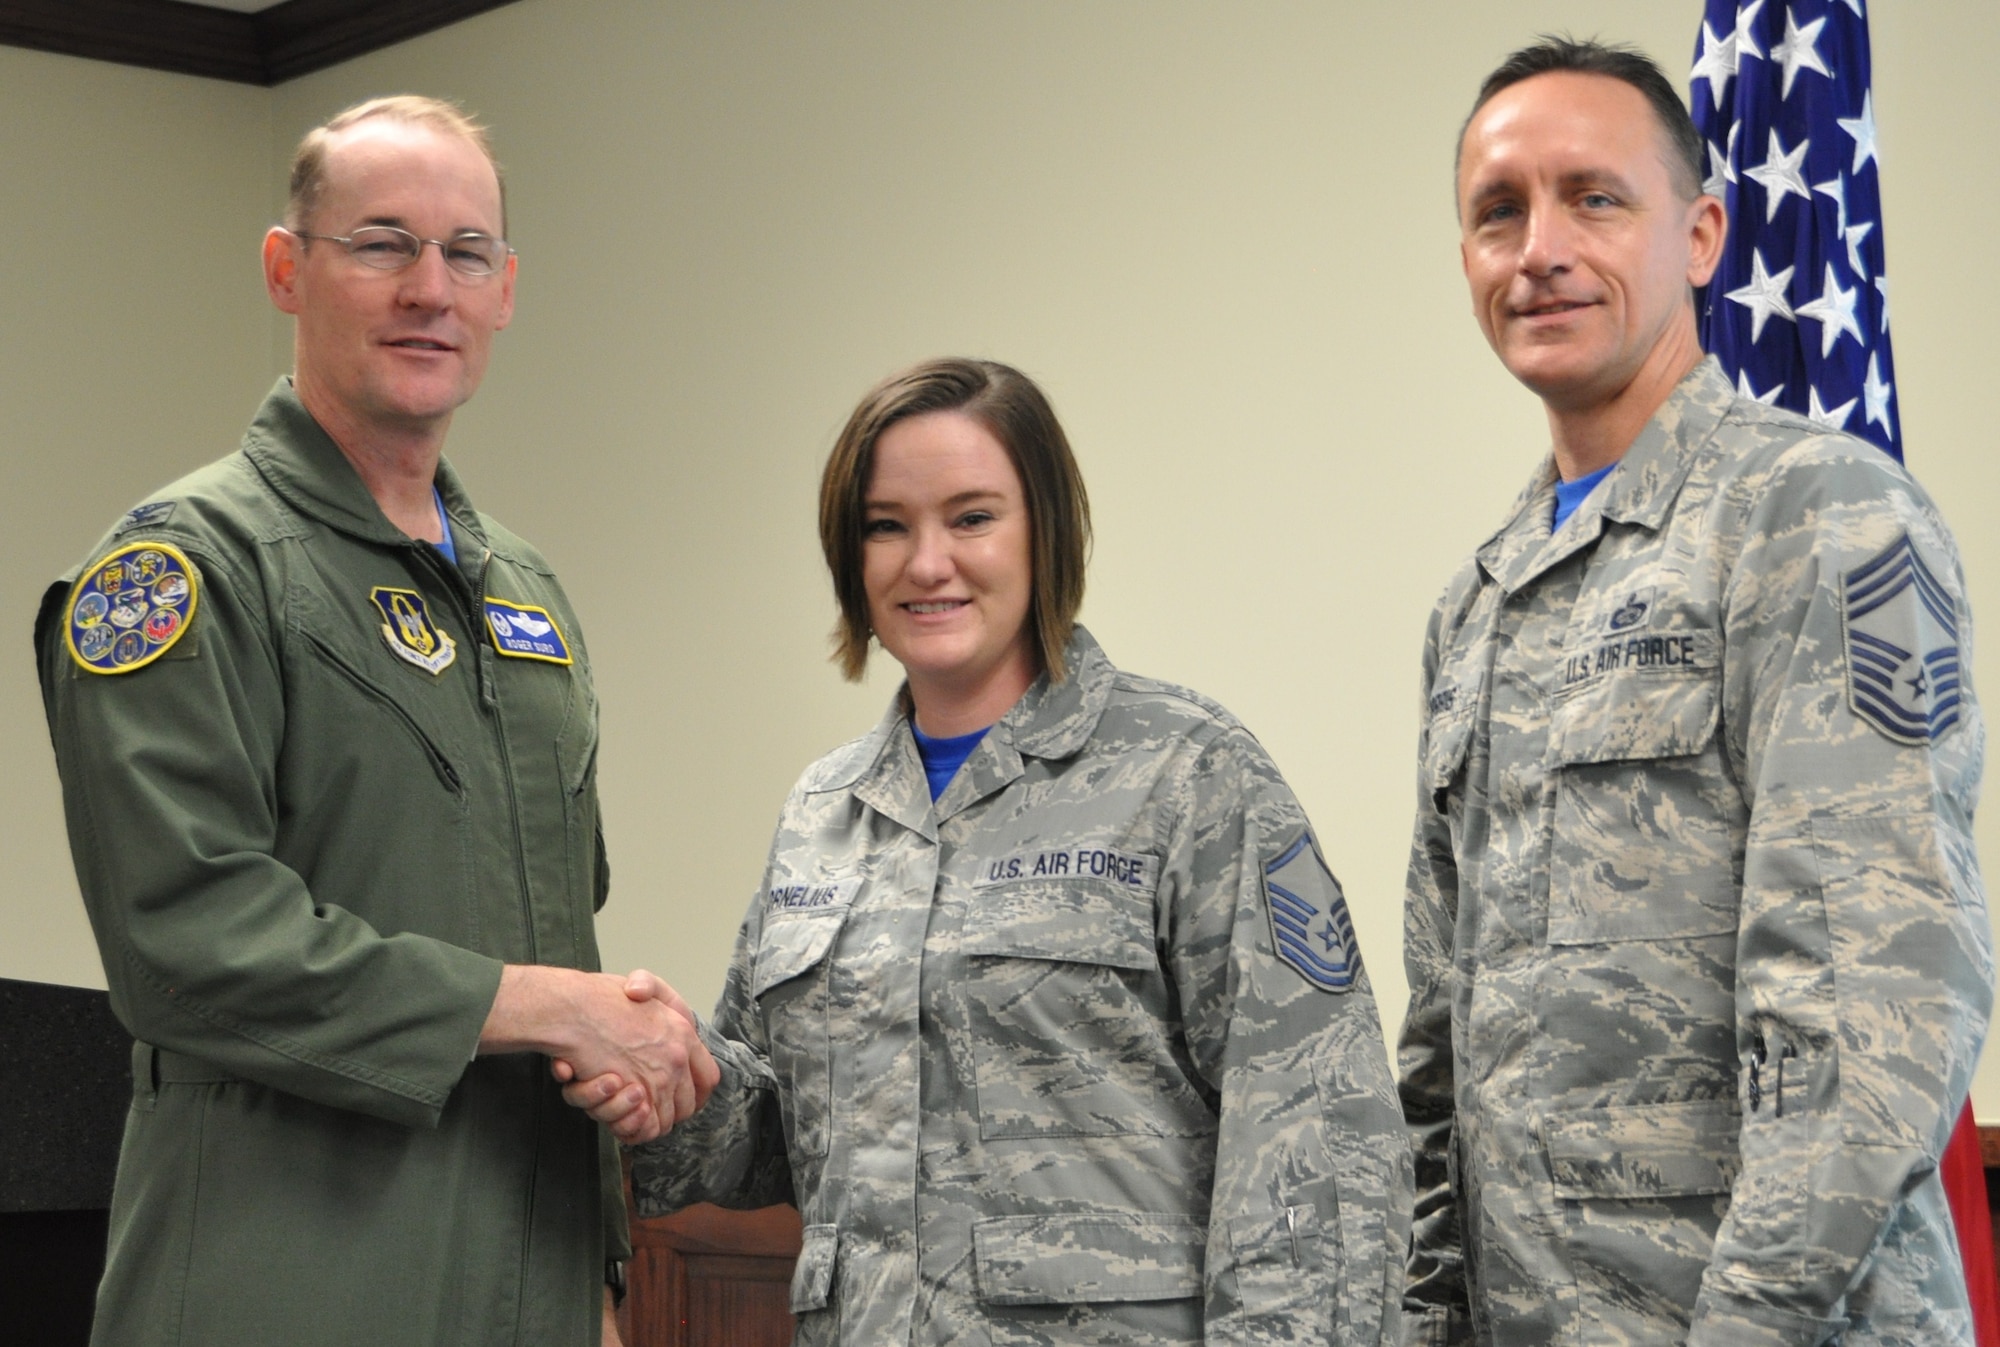 Master Sgt. Sarah Cornelius being coined by Col. Roger Suro, 340th FTG commander for her work with the Green Dot Program, as group superintendent, Chief Master Sgt. Jimmie Morris stands by to congratulate the member during the group’s Dec. 1 MUTA at Joint Base San Antonio-Randolph, Texas (Photo by Janis El Shabazz).